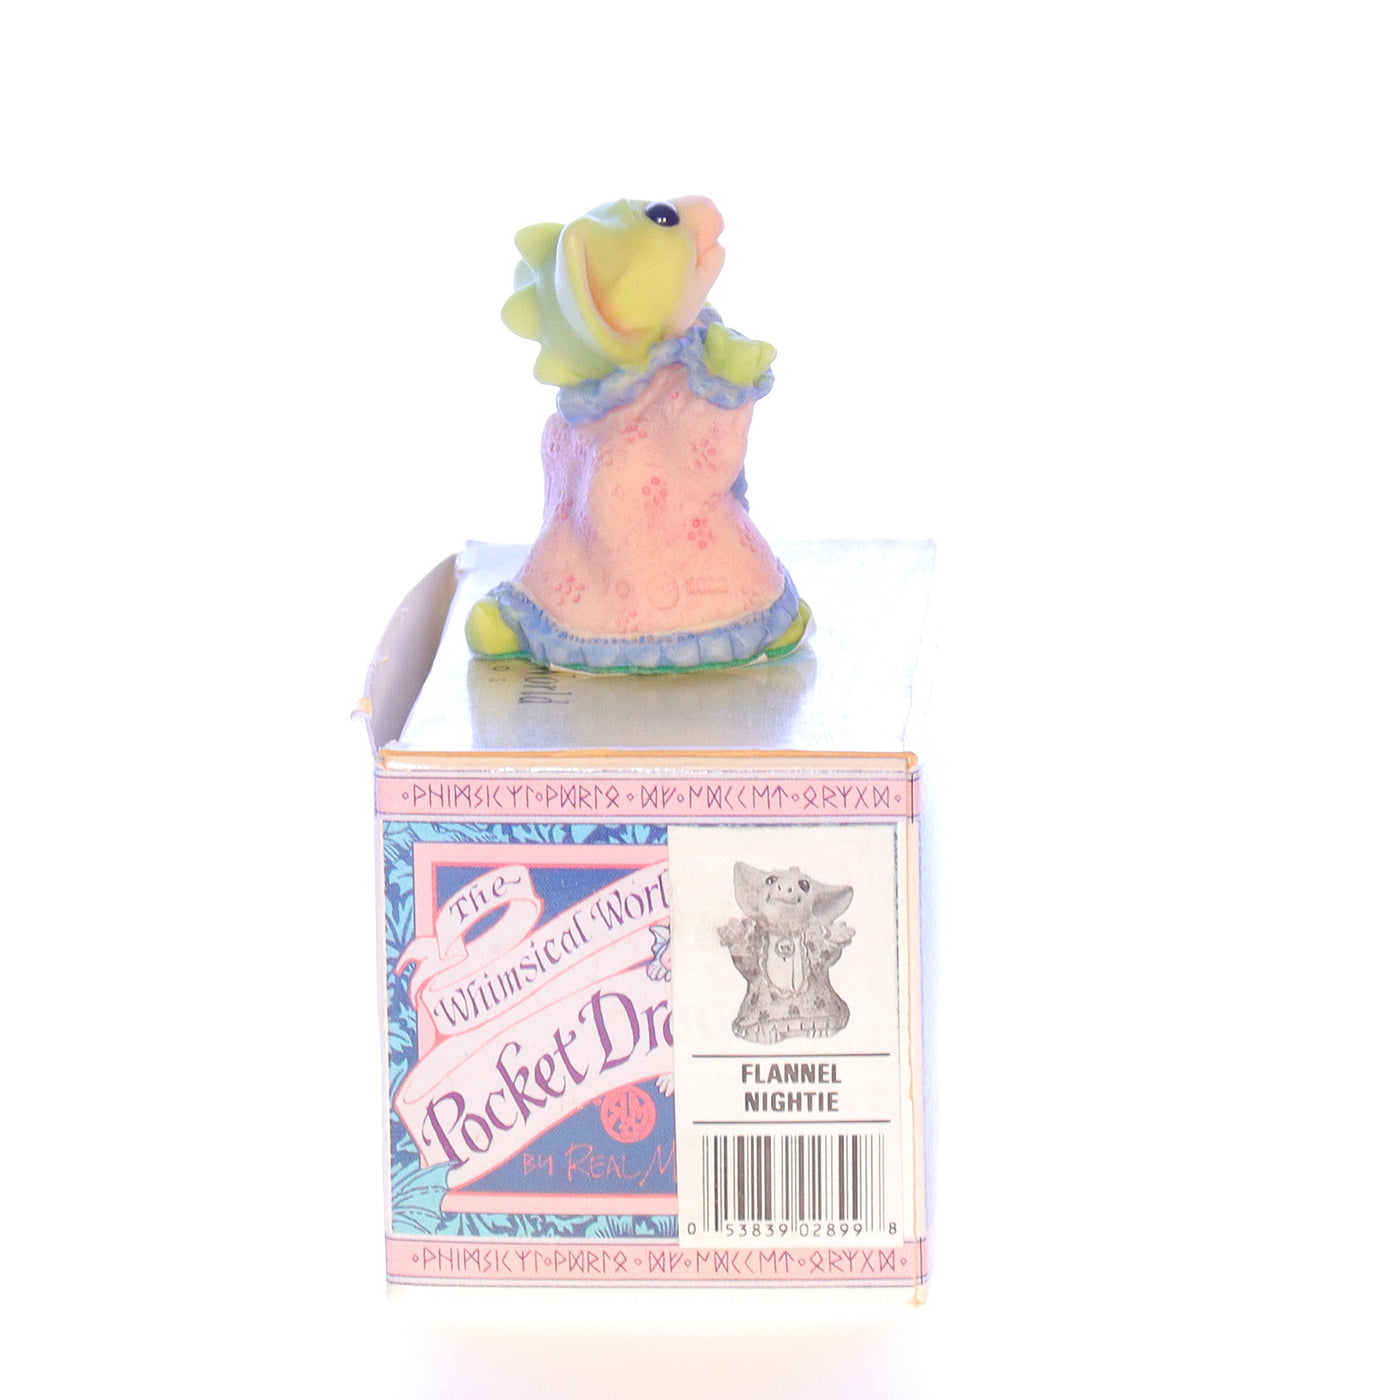 Whimsical_World_of_Pocket_Dragons_053839028998_Flannel_Nightie_Fantasy_Figurine_1998_Box Right View